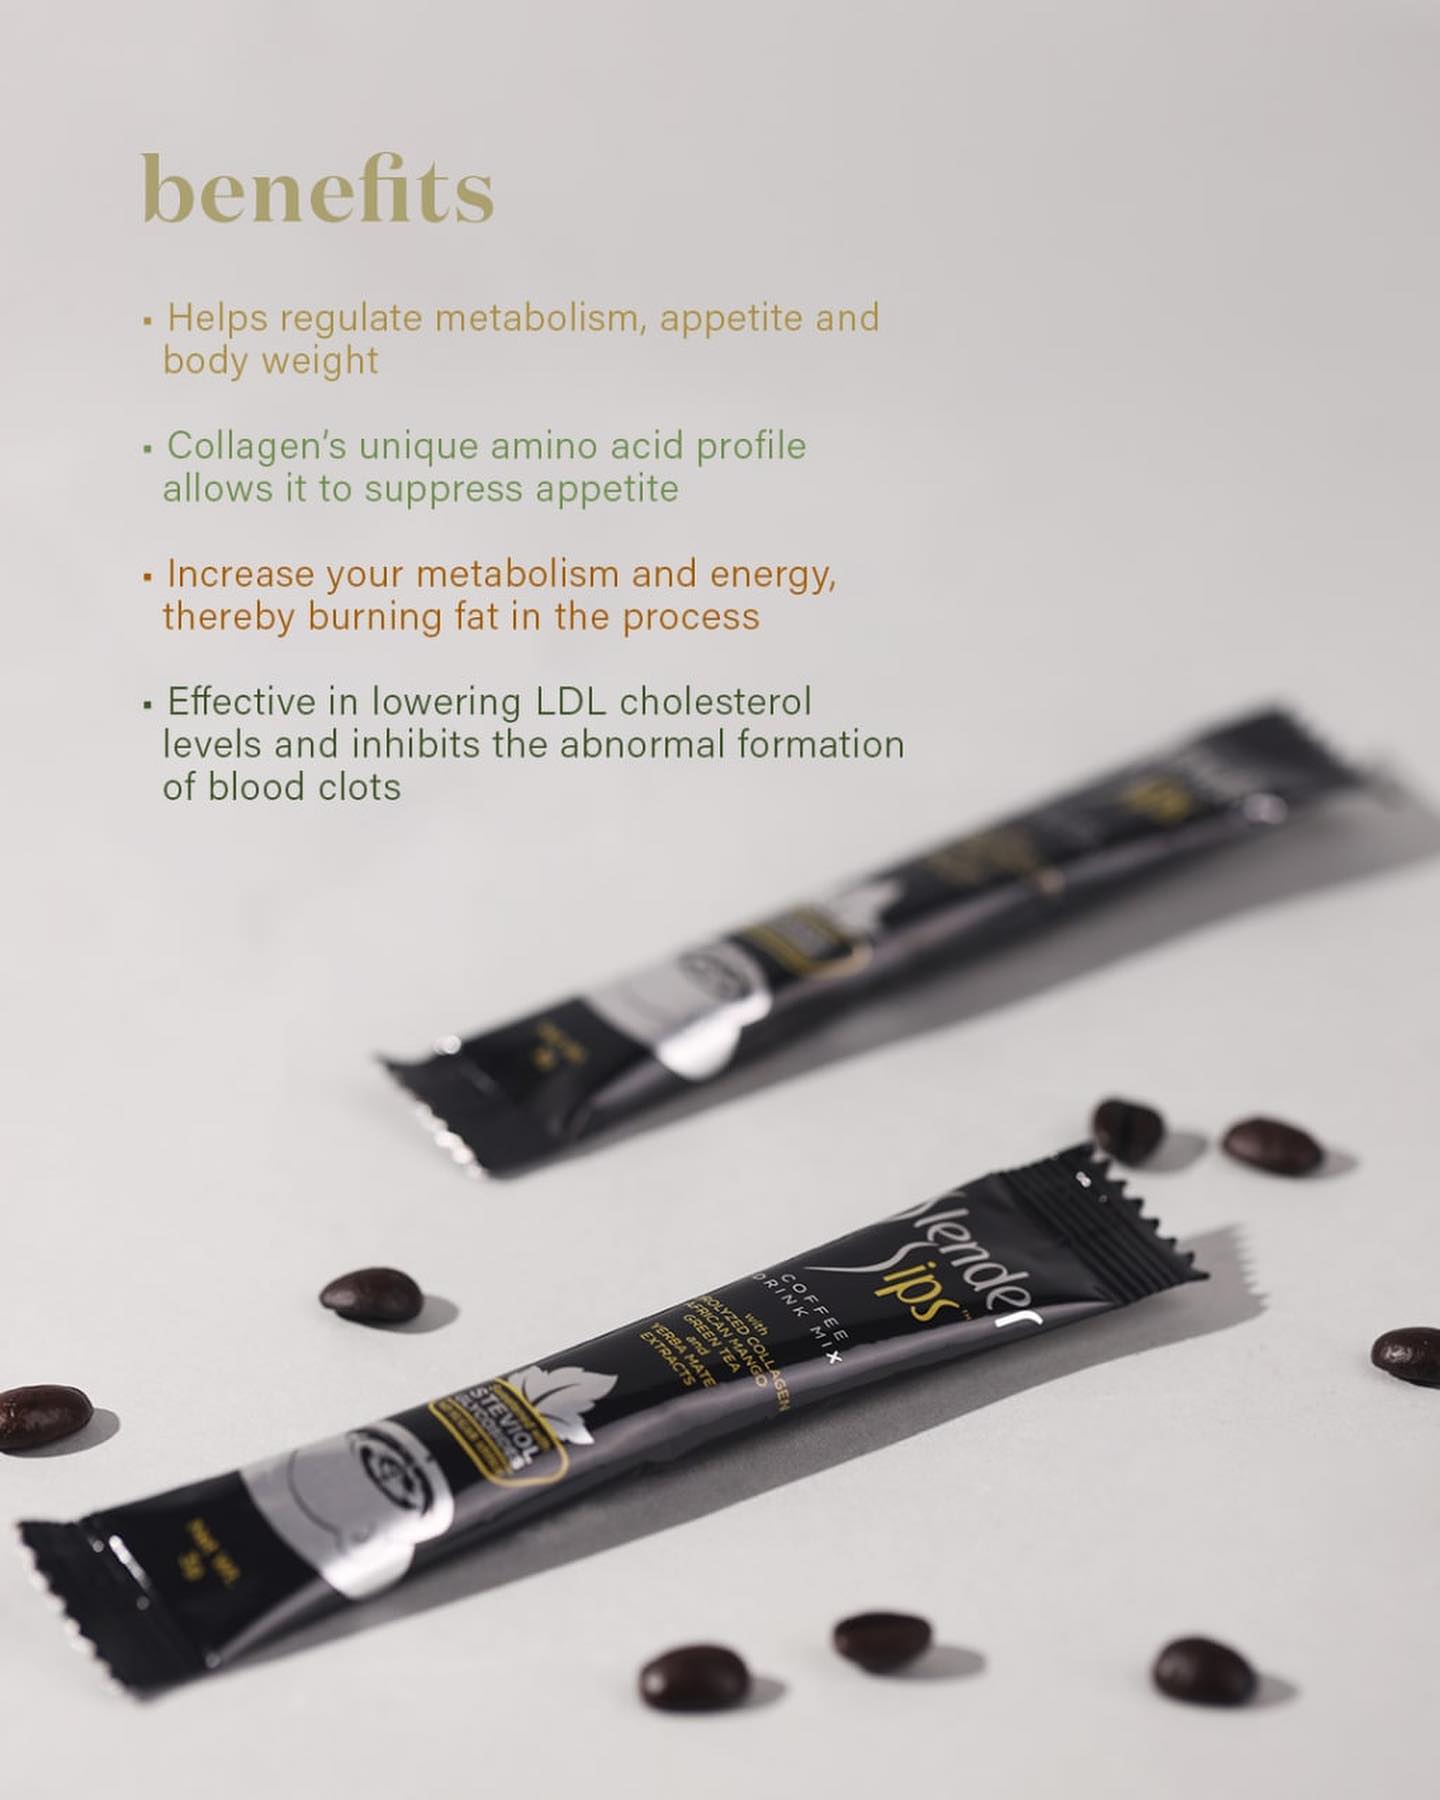 Beautederm Slender Sips Slimming Coffee Mix Drink Benefits Metabolism Appetite Weight Loss